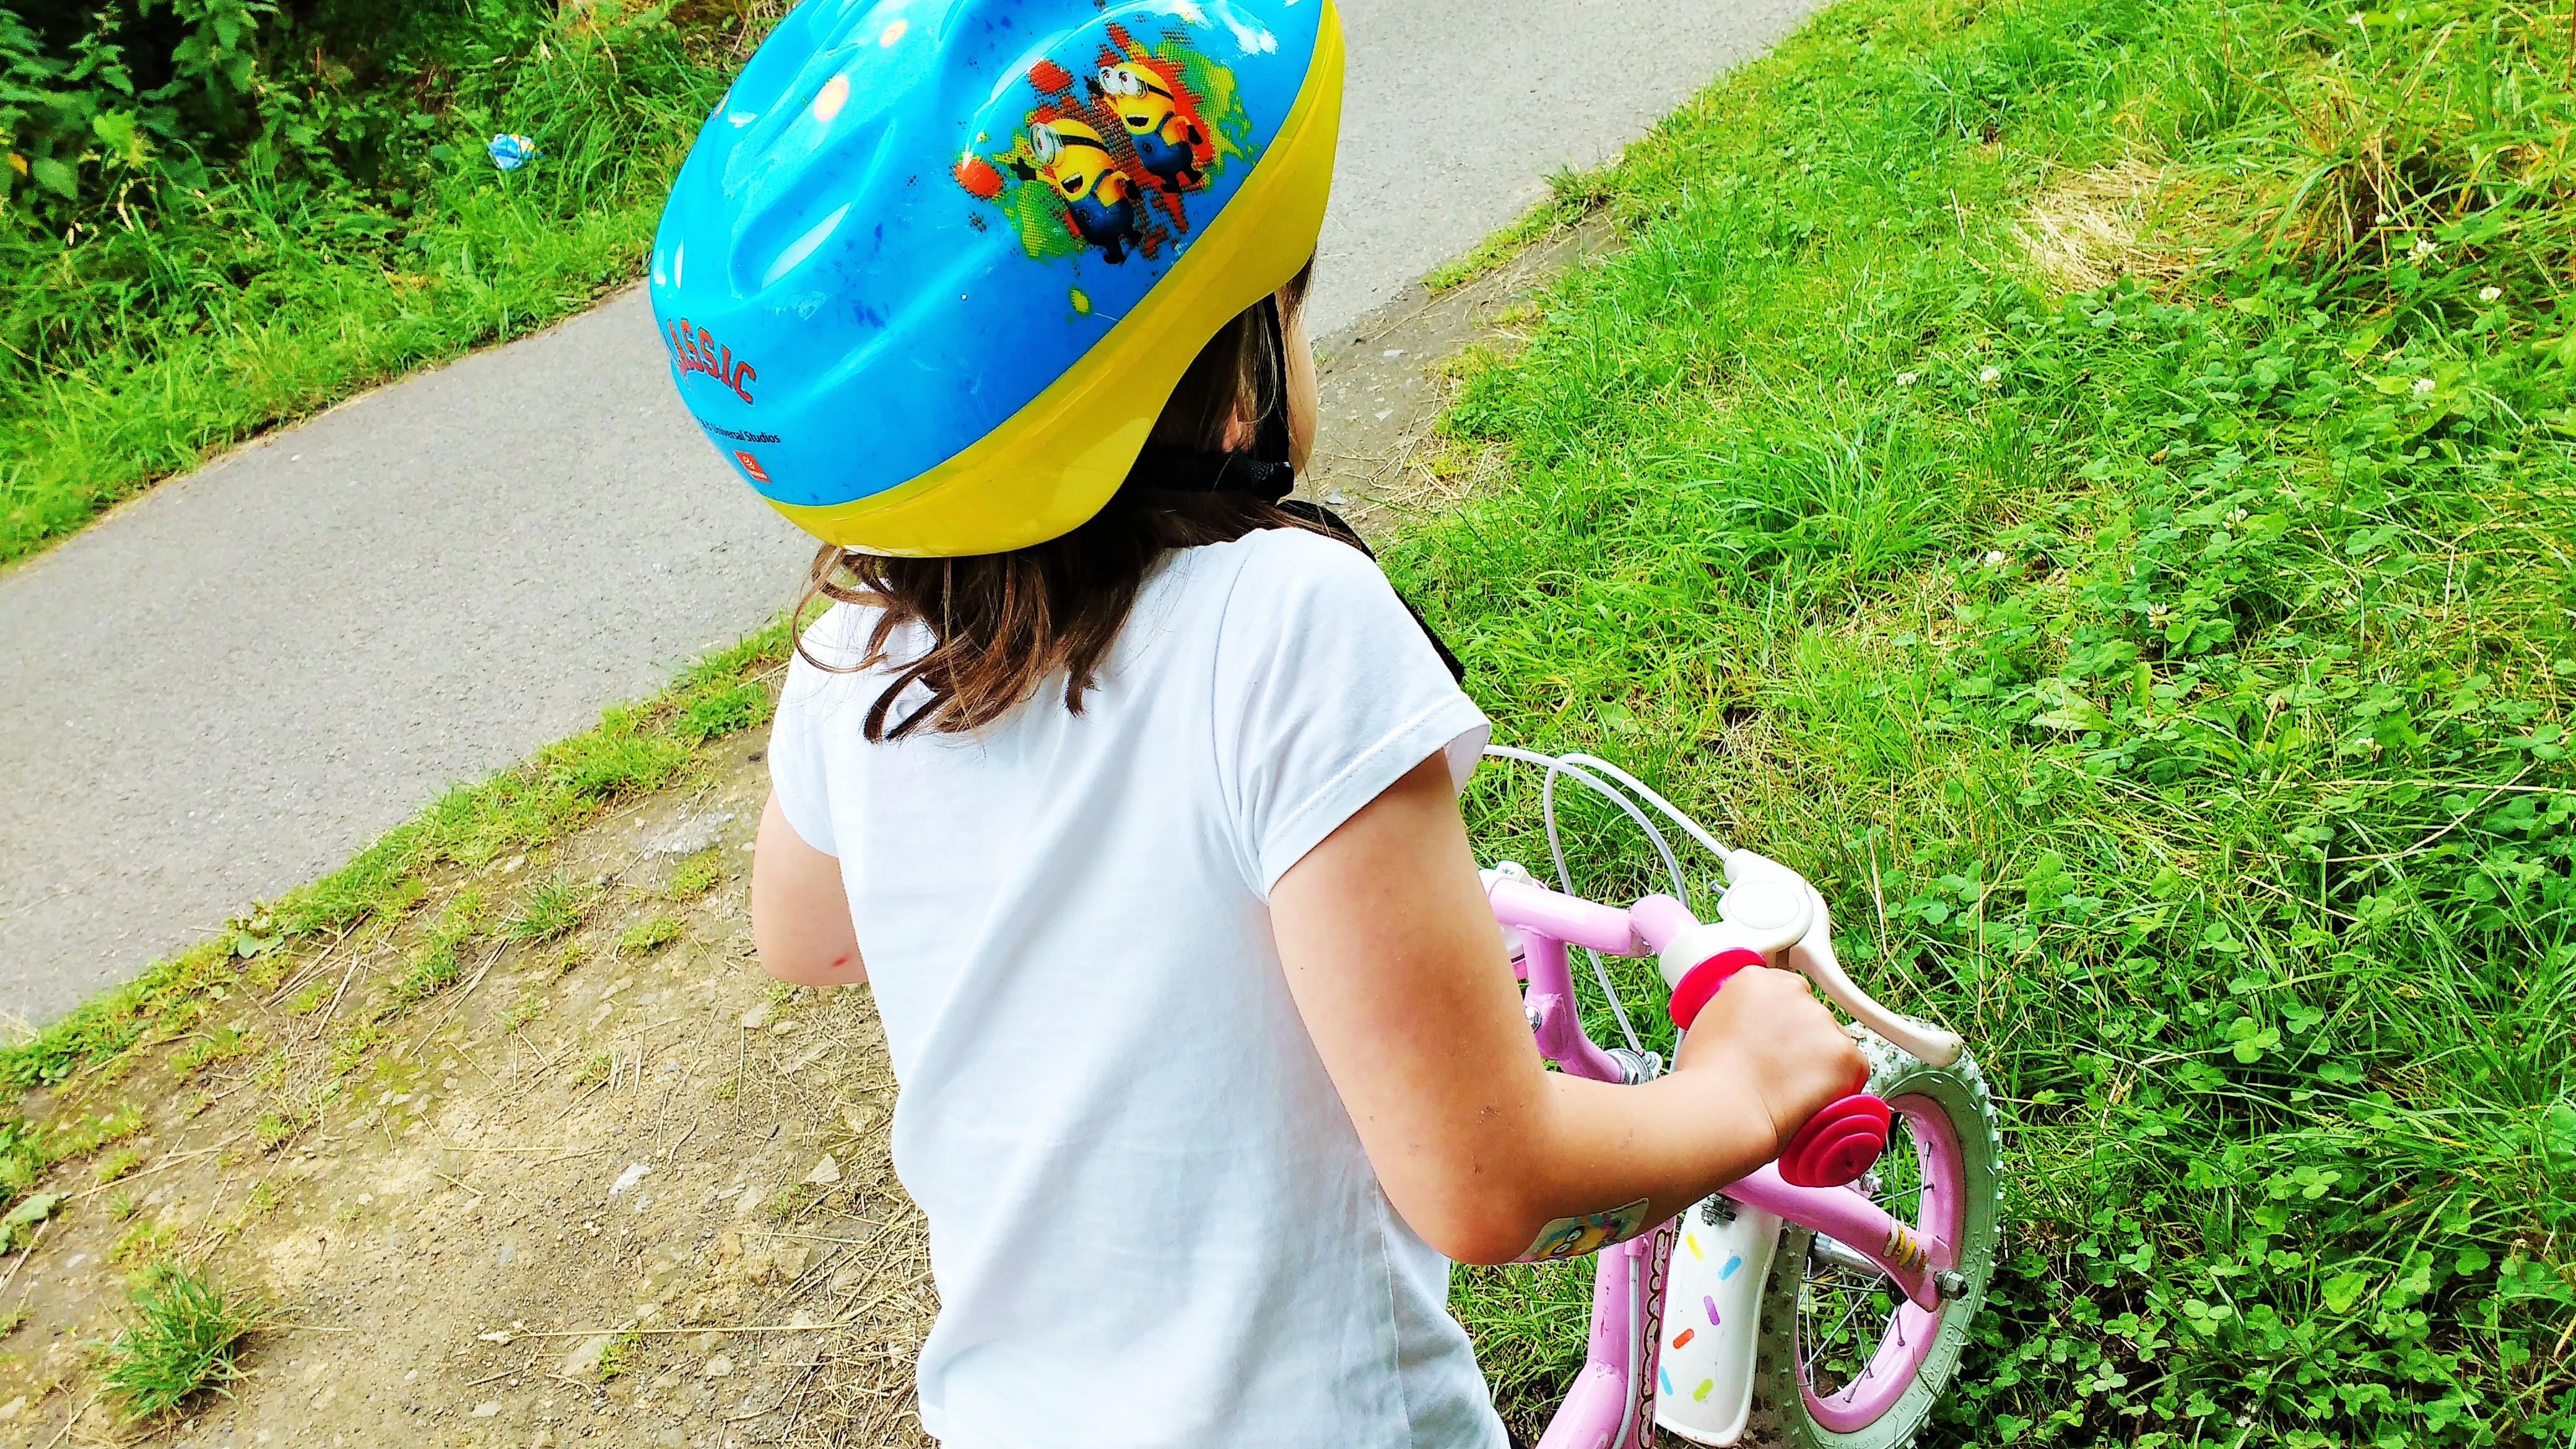 Ride a bike despicable me helmet themed activities trike